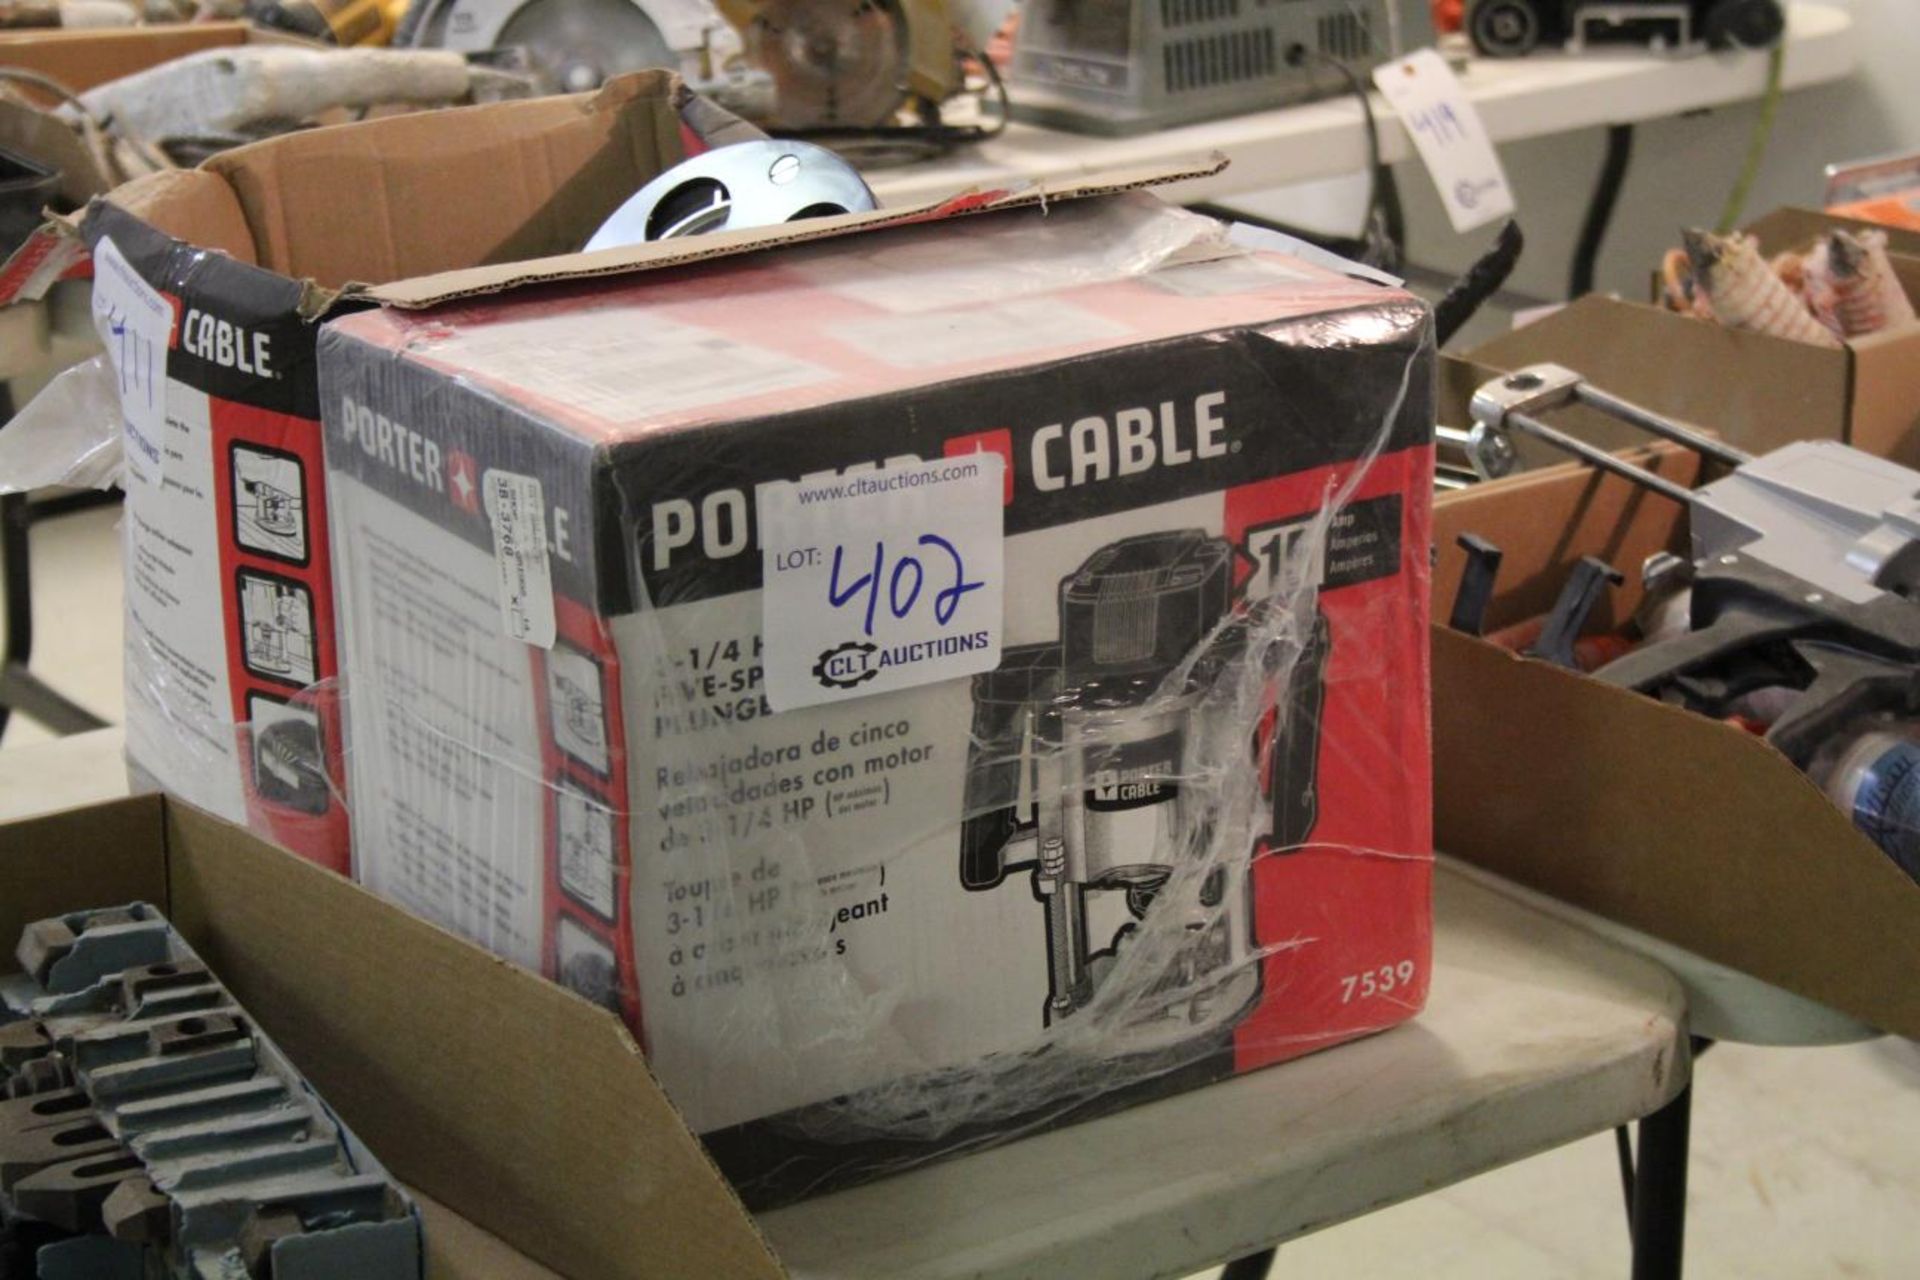 Porter Cable 7539 5 Speed Plunge Router, Sealed Box, 3 1/4 hp - Image 4 of 4